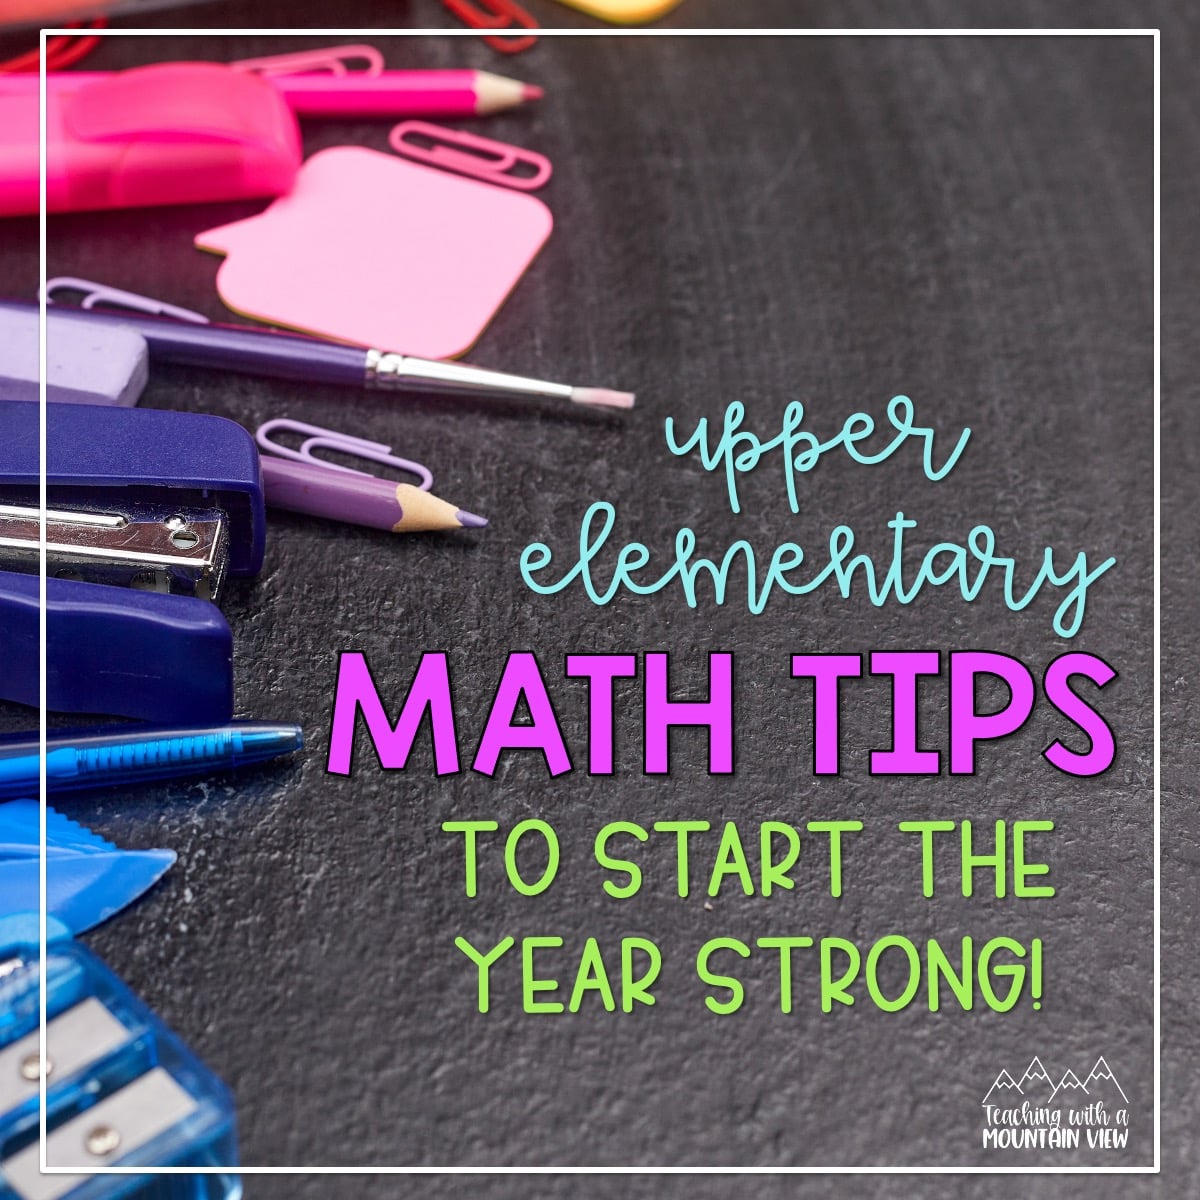 Math tips and activities to start the year strong in upper elementary. Includes ideas for morning work, centers, and review.